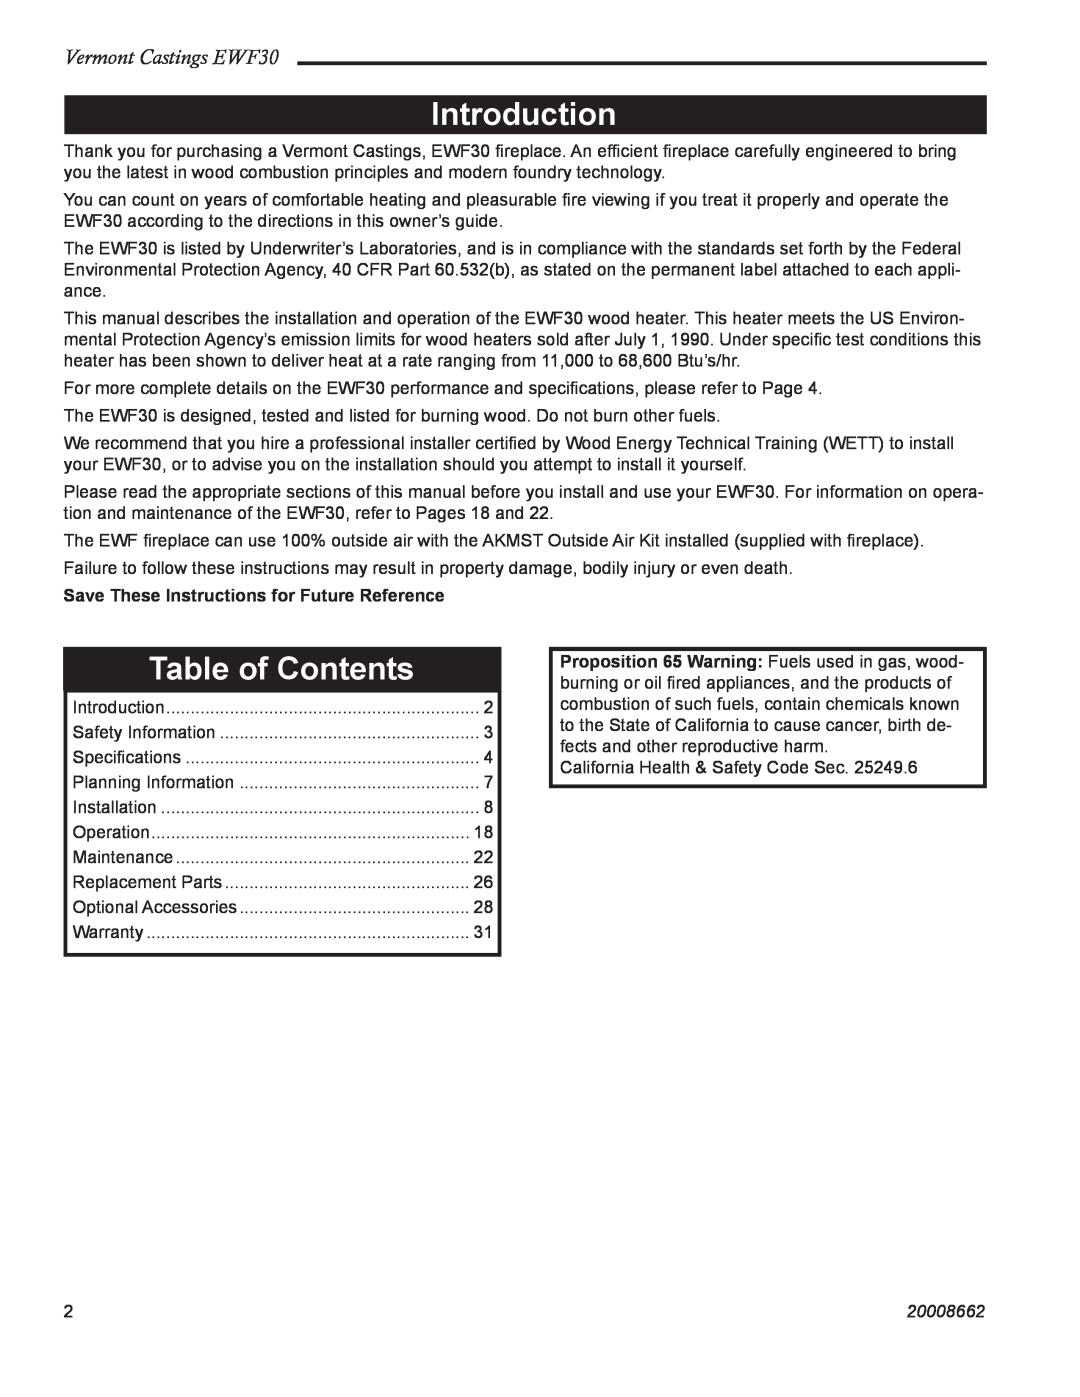 Vermont Casting Introduction, Table of Contents, Vermont Castings EWF30, Save These Instructions for Future Reference 